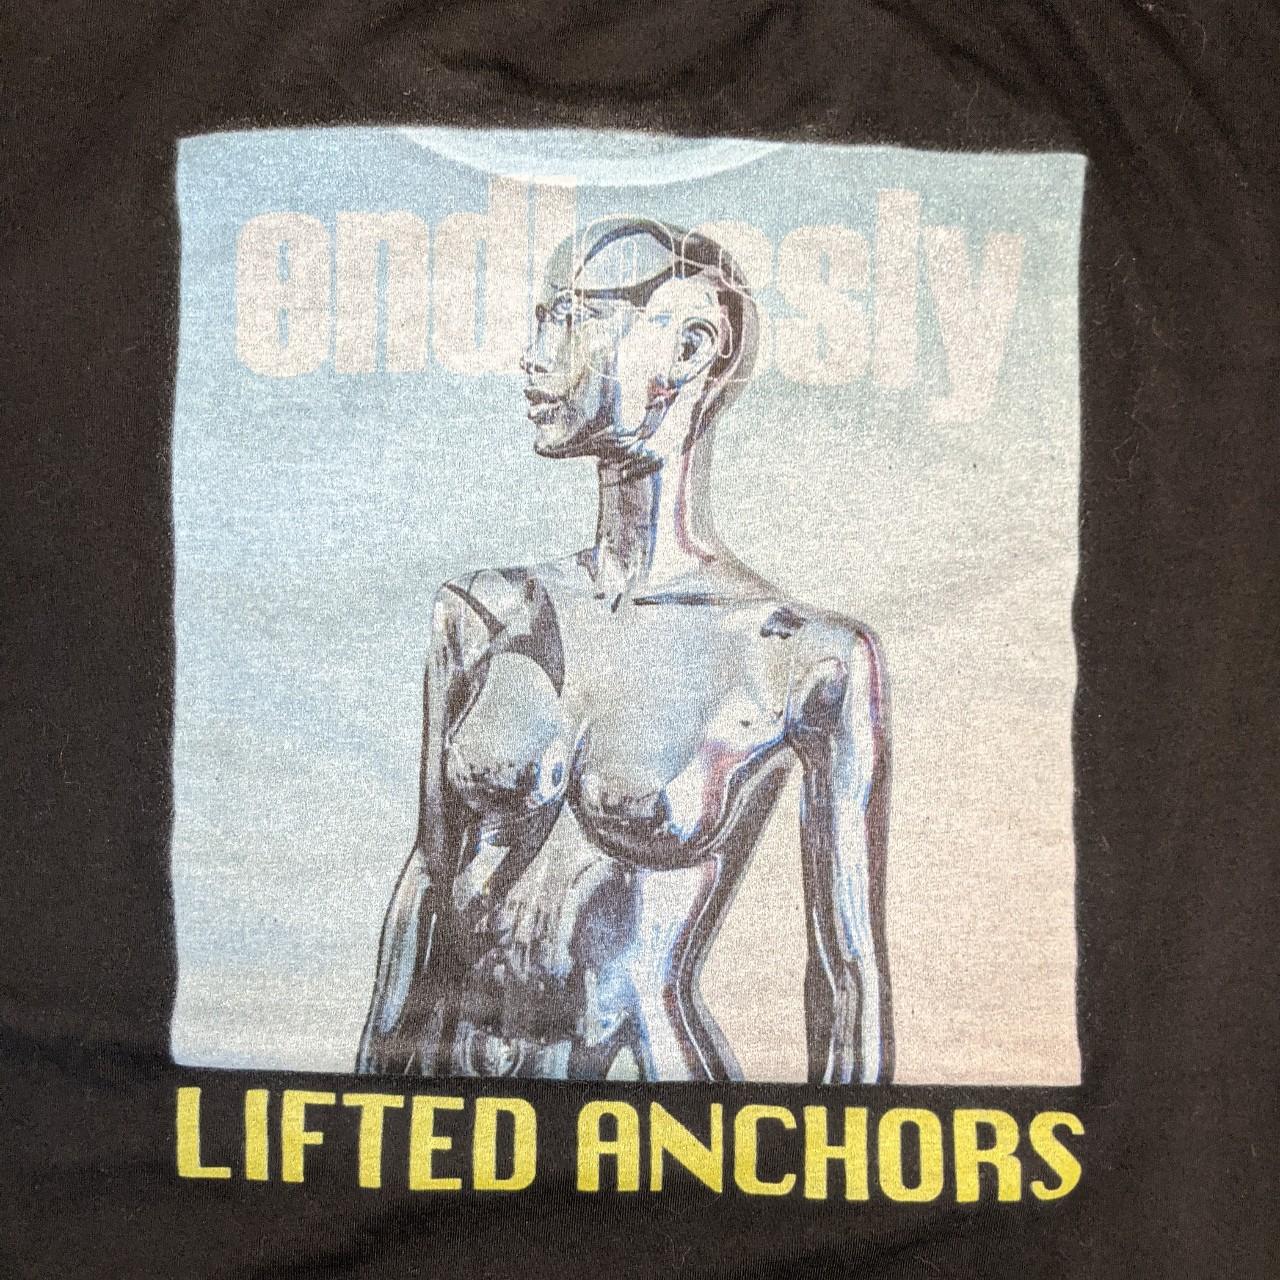 Lifted Anchors Men's Black and Blue T-shirt (4)